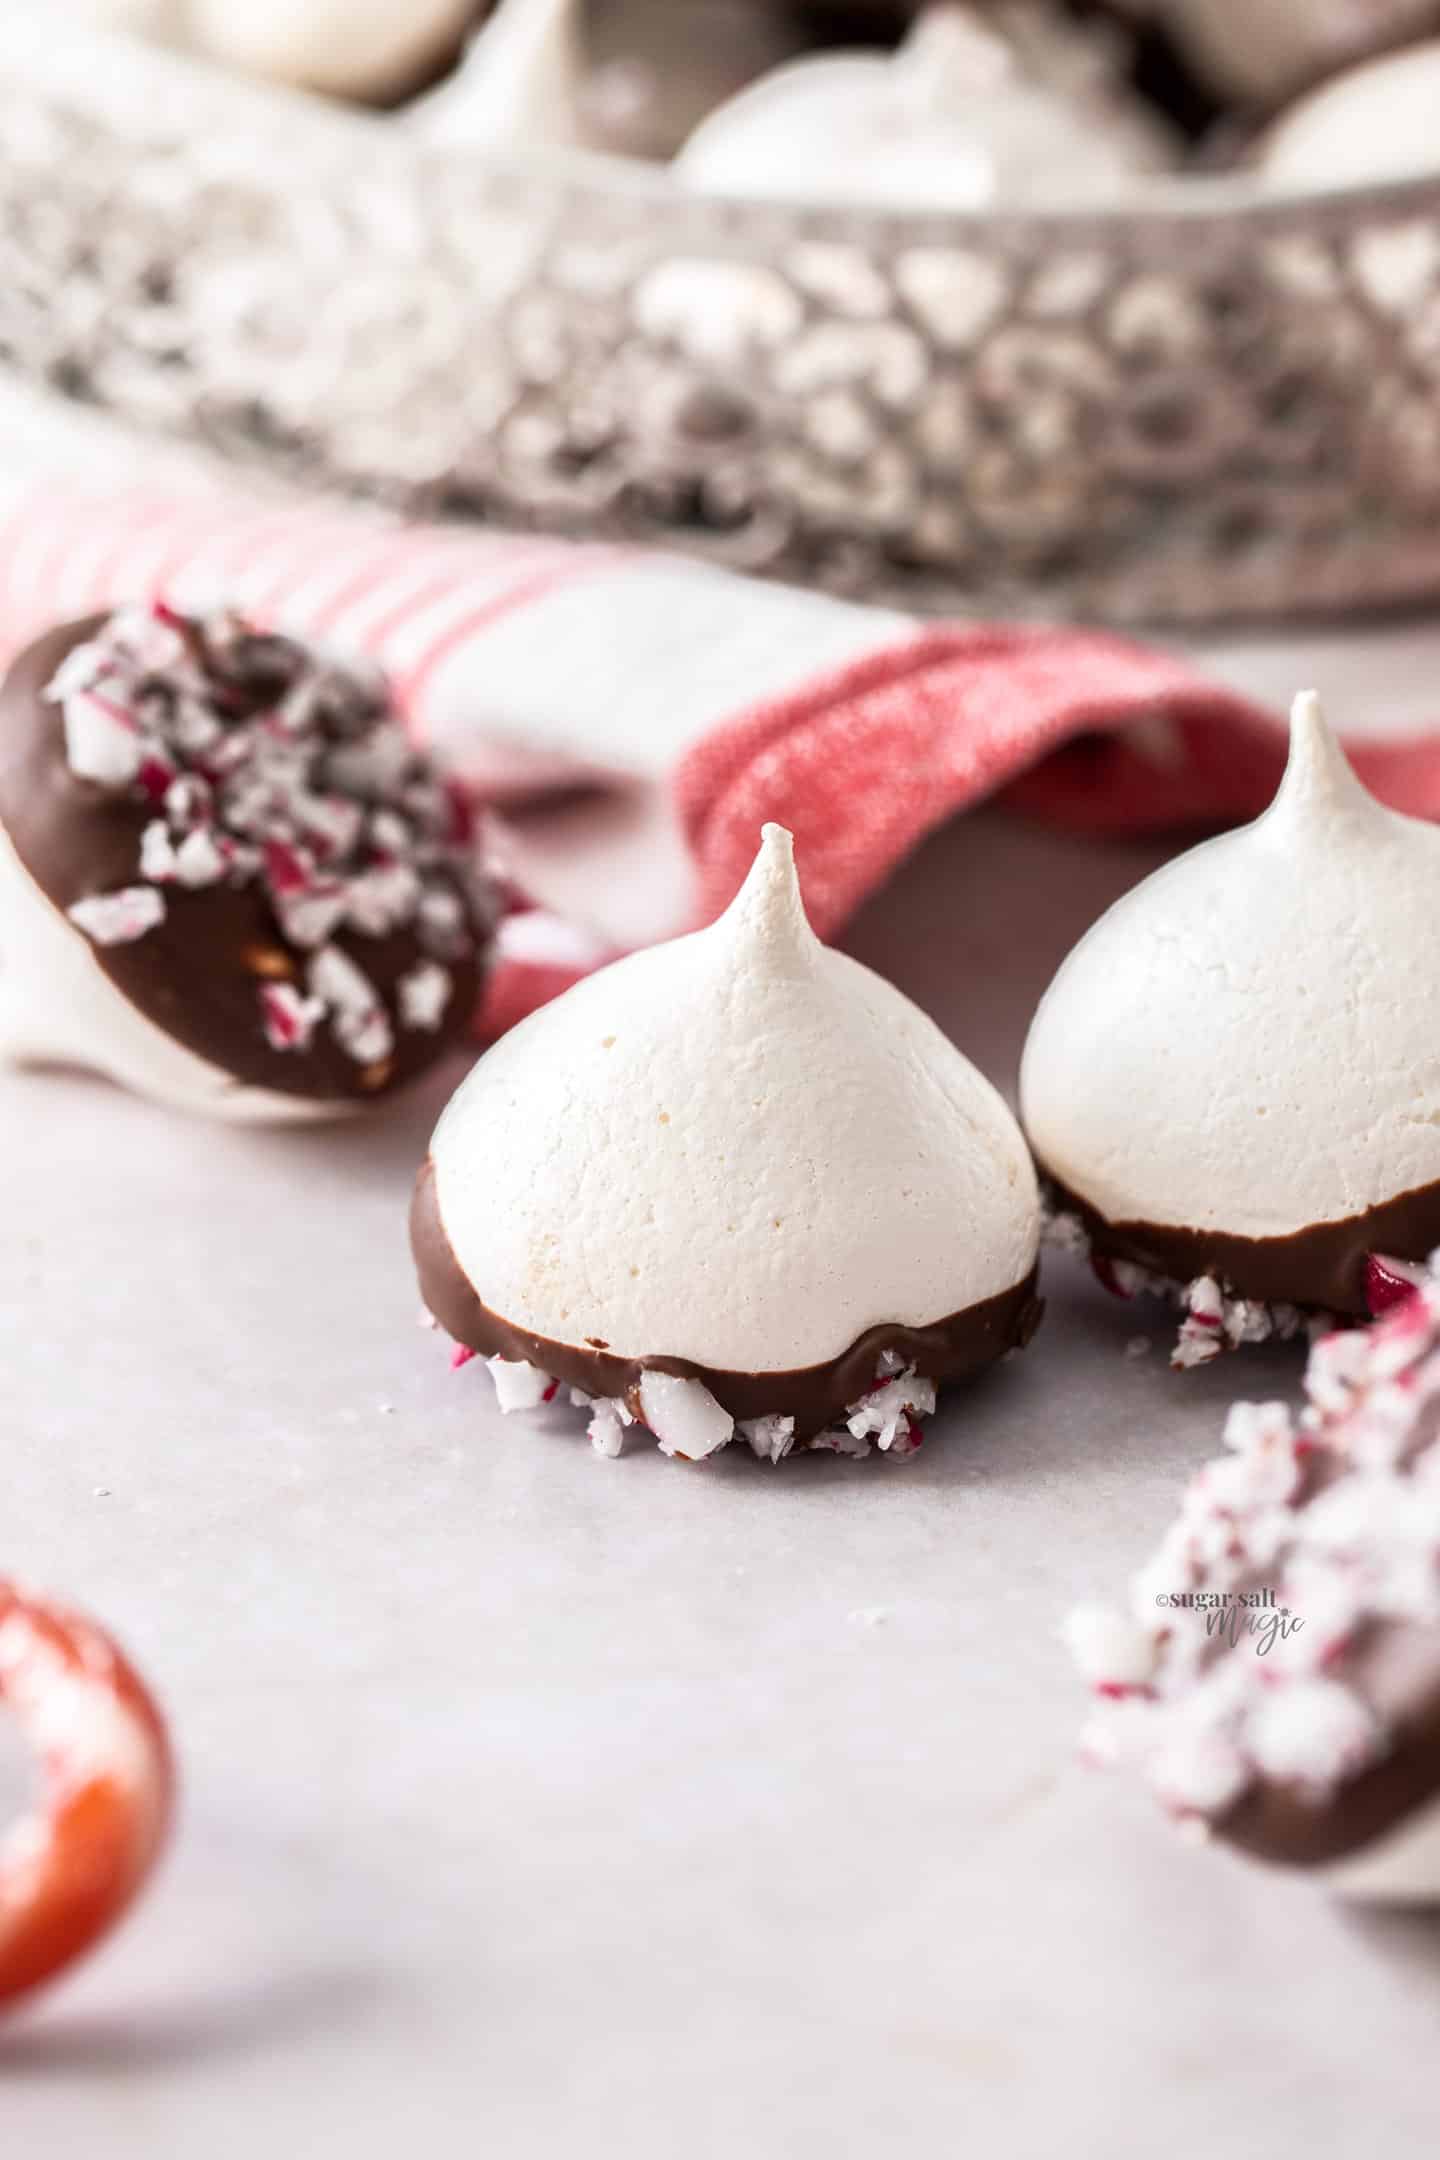 Closeup of a peppermint meringue with a chocolate base.